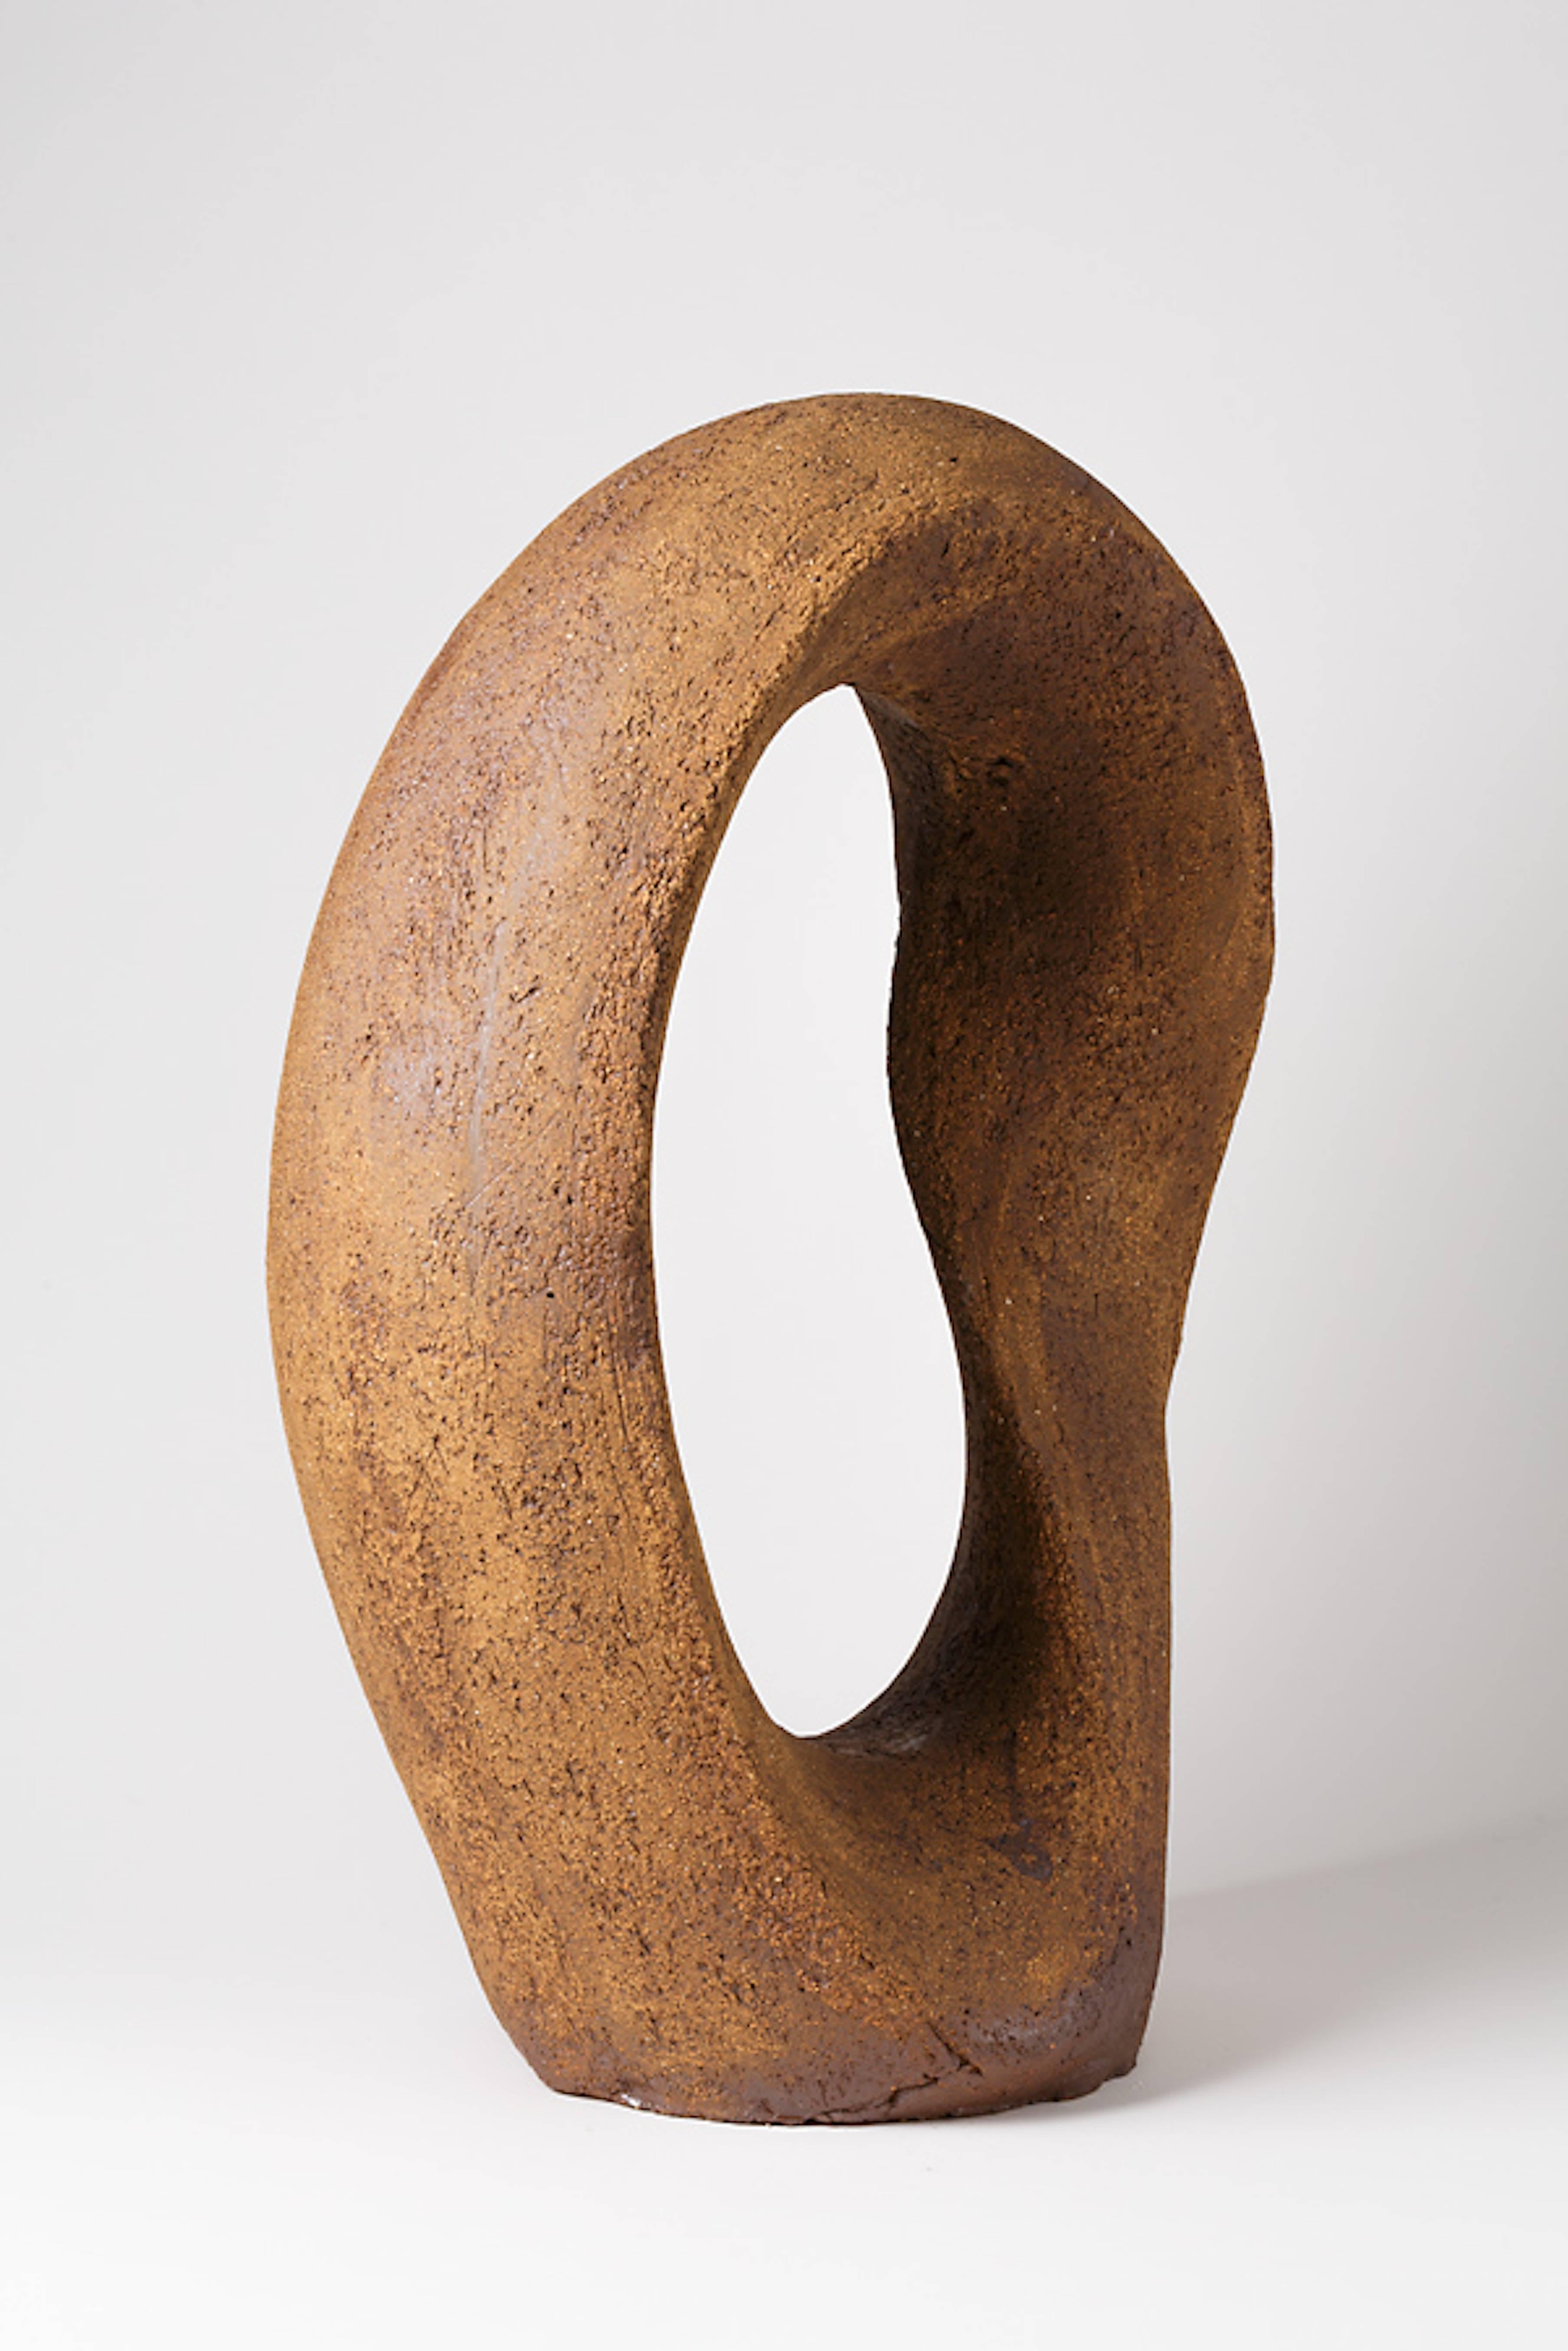 Important Stoneware Sculpture by Tim Orr, circa 1970-1980 In Excellent Condition For Sale In Neuilly-en- sancerre, FR